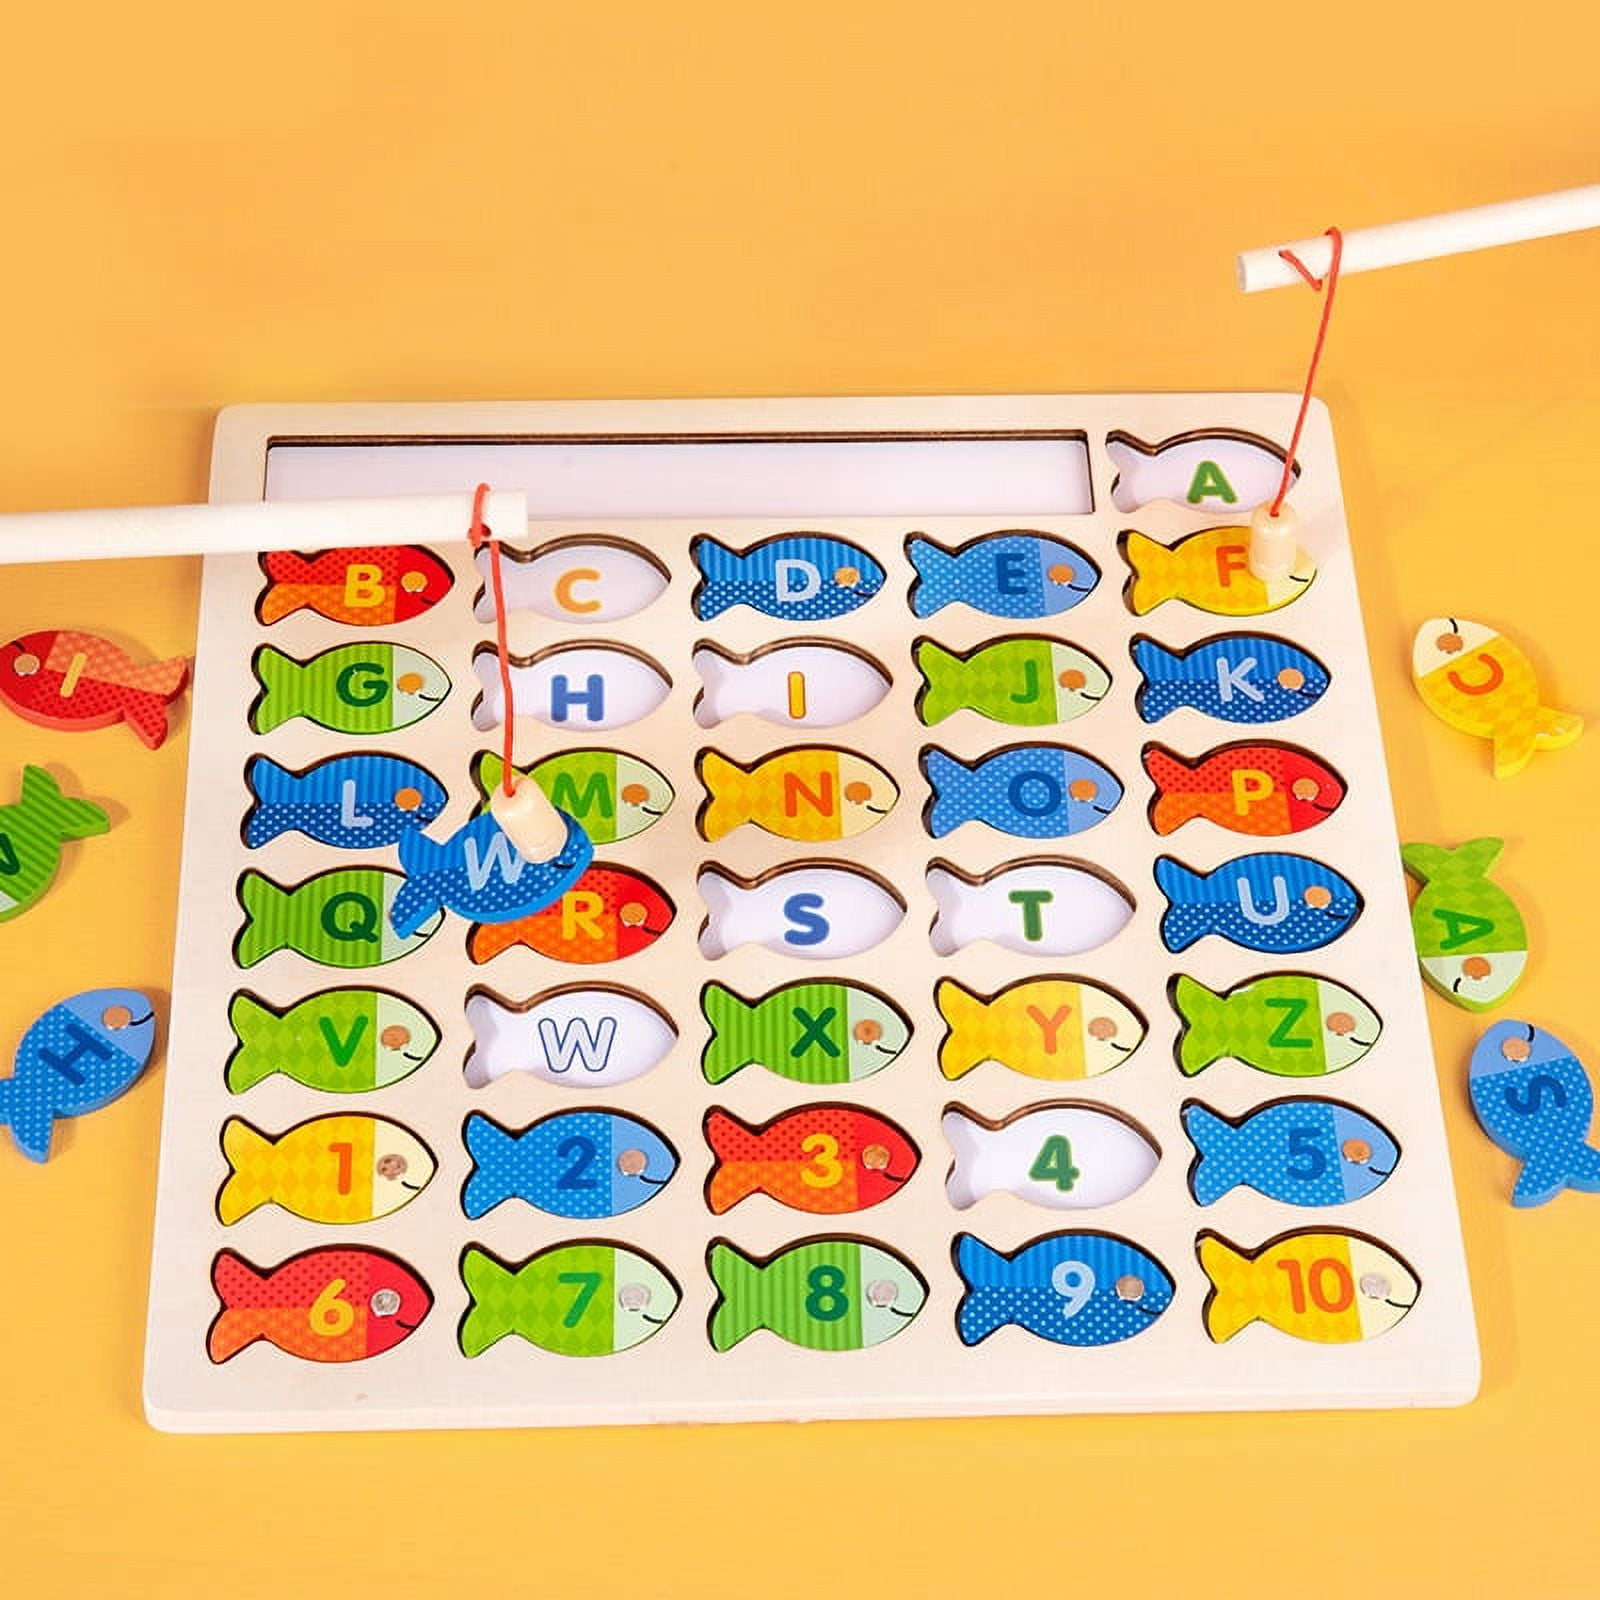 Buy Slotic Magnetic Wooden Fishing Game Toy for Toddlers - Alphabet ABC  Fish Catching Counting Learning Education Math Preschool Board Games Toys  Gifts for 3 4 5 Years Old Girl Boy Kids